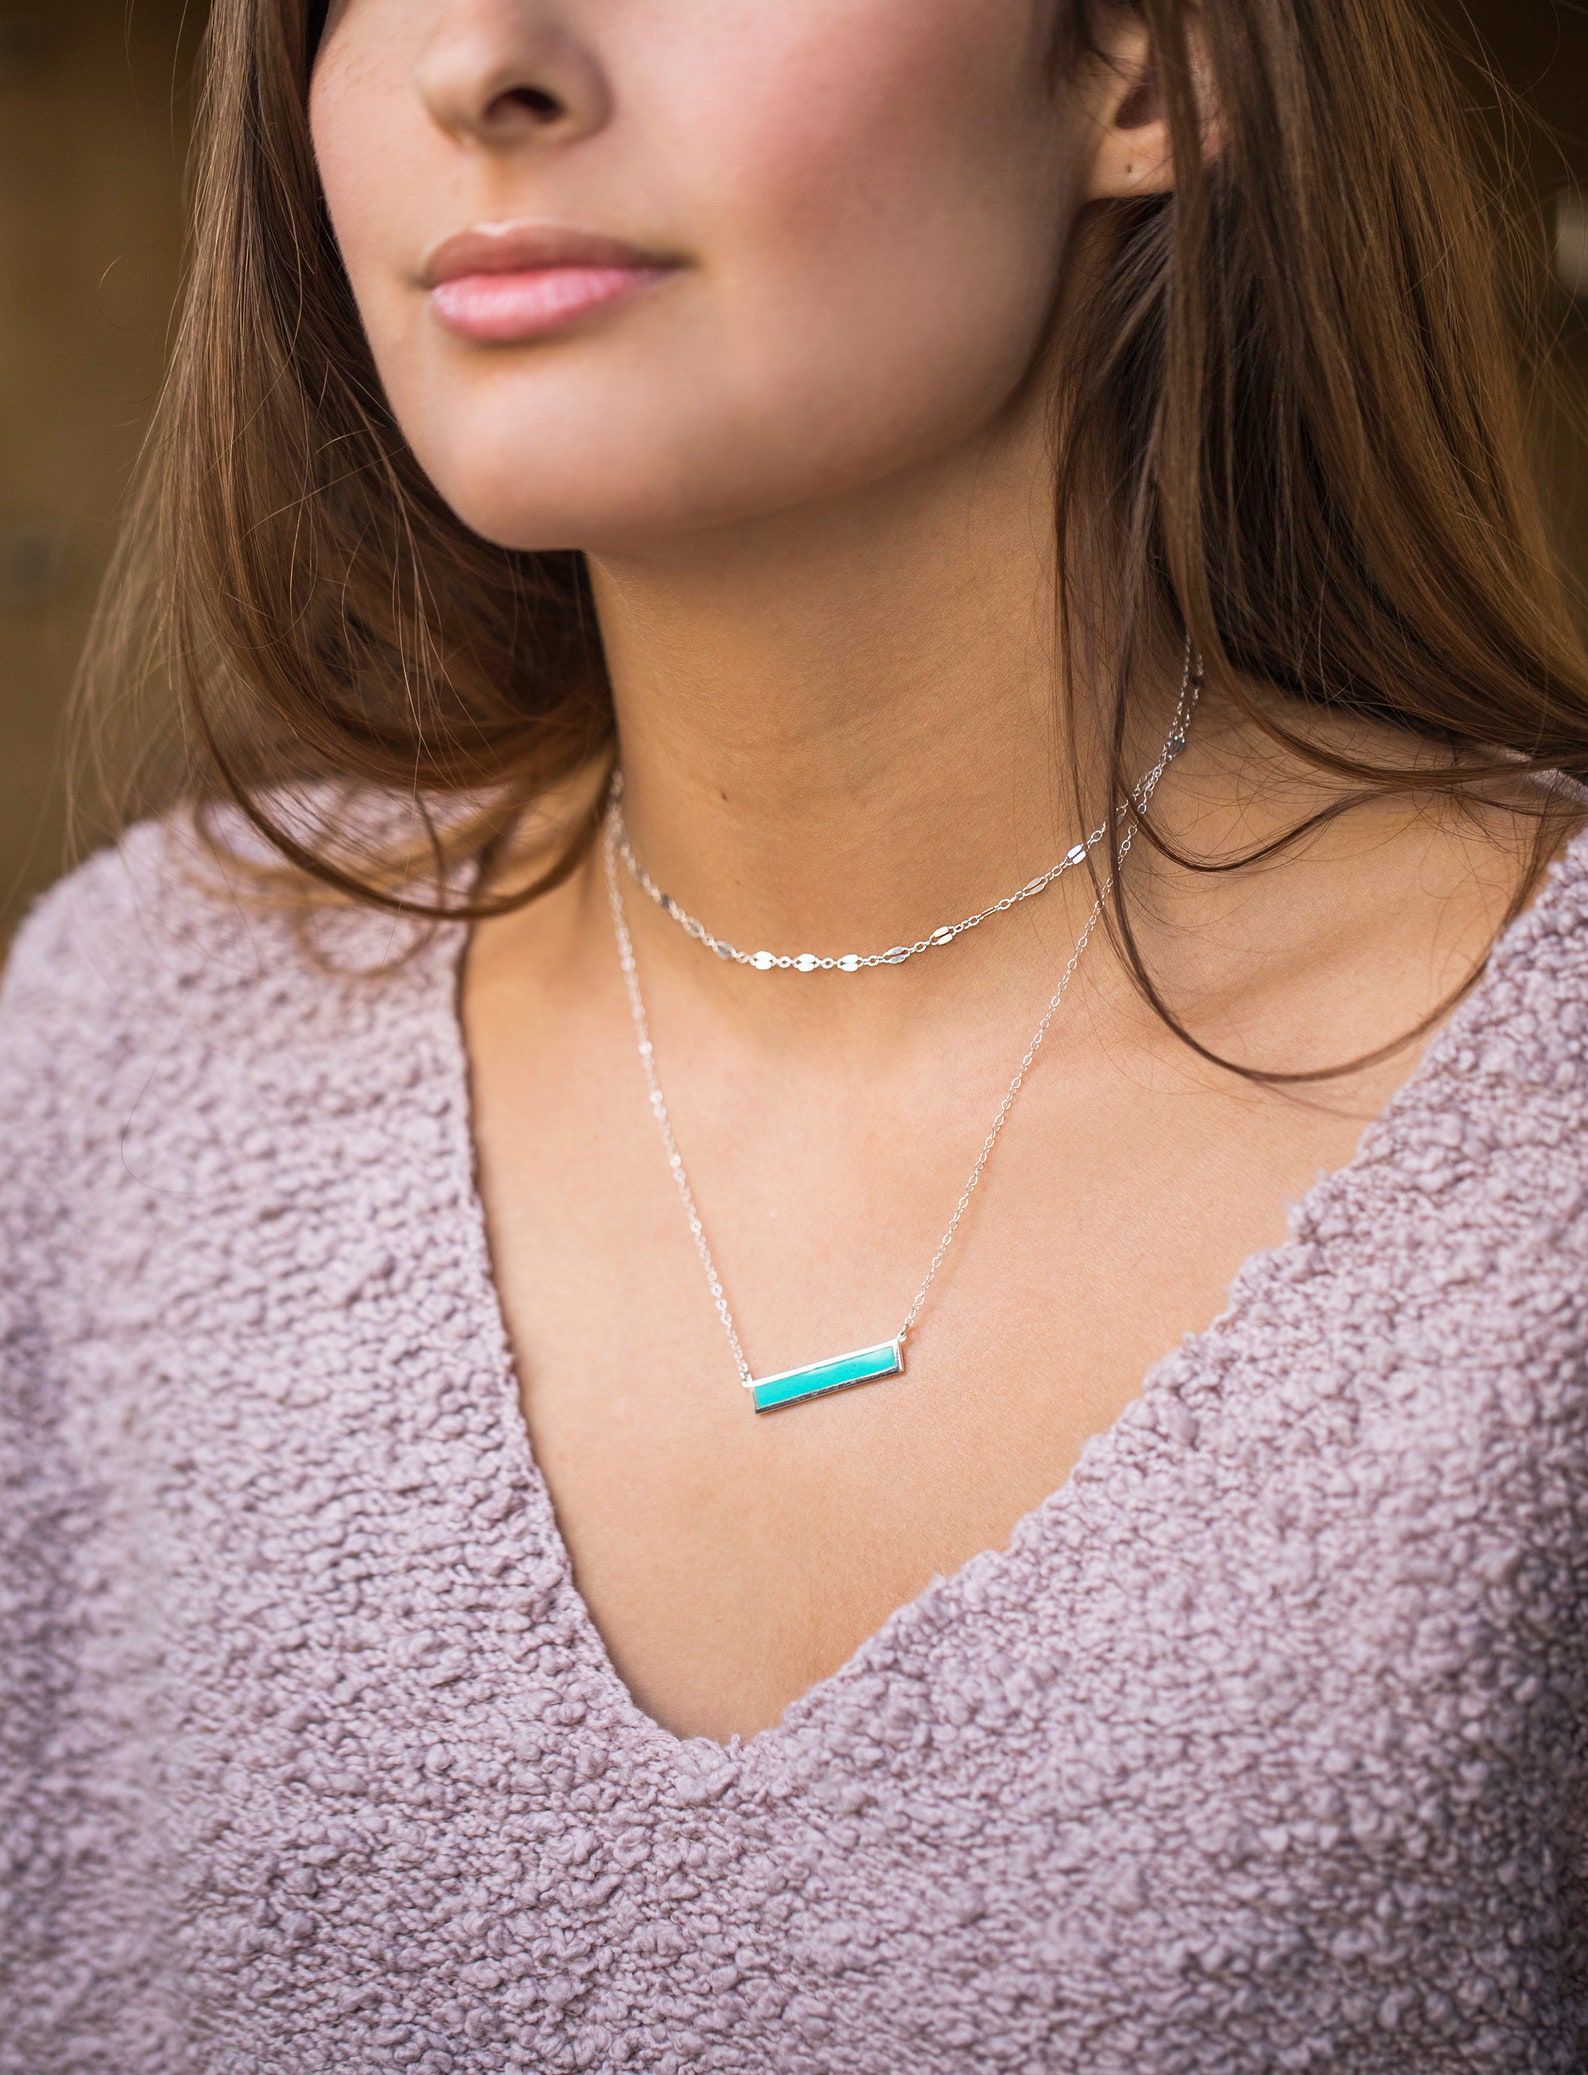 High Quality Turquoise Bar Necklace Necklace For Mom Inlay Etsy